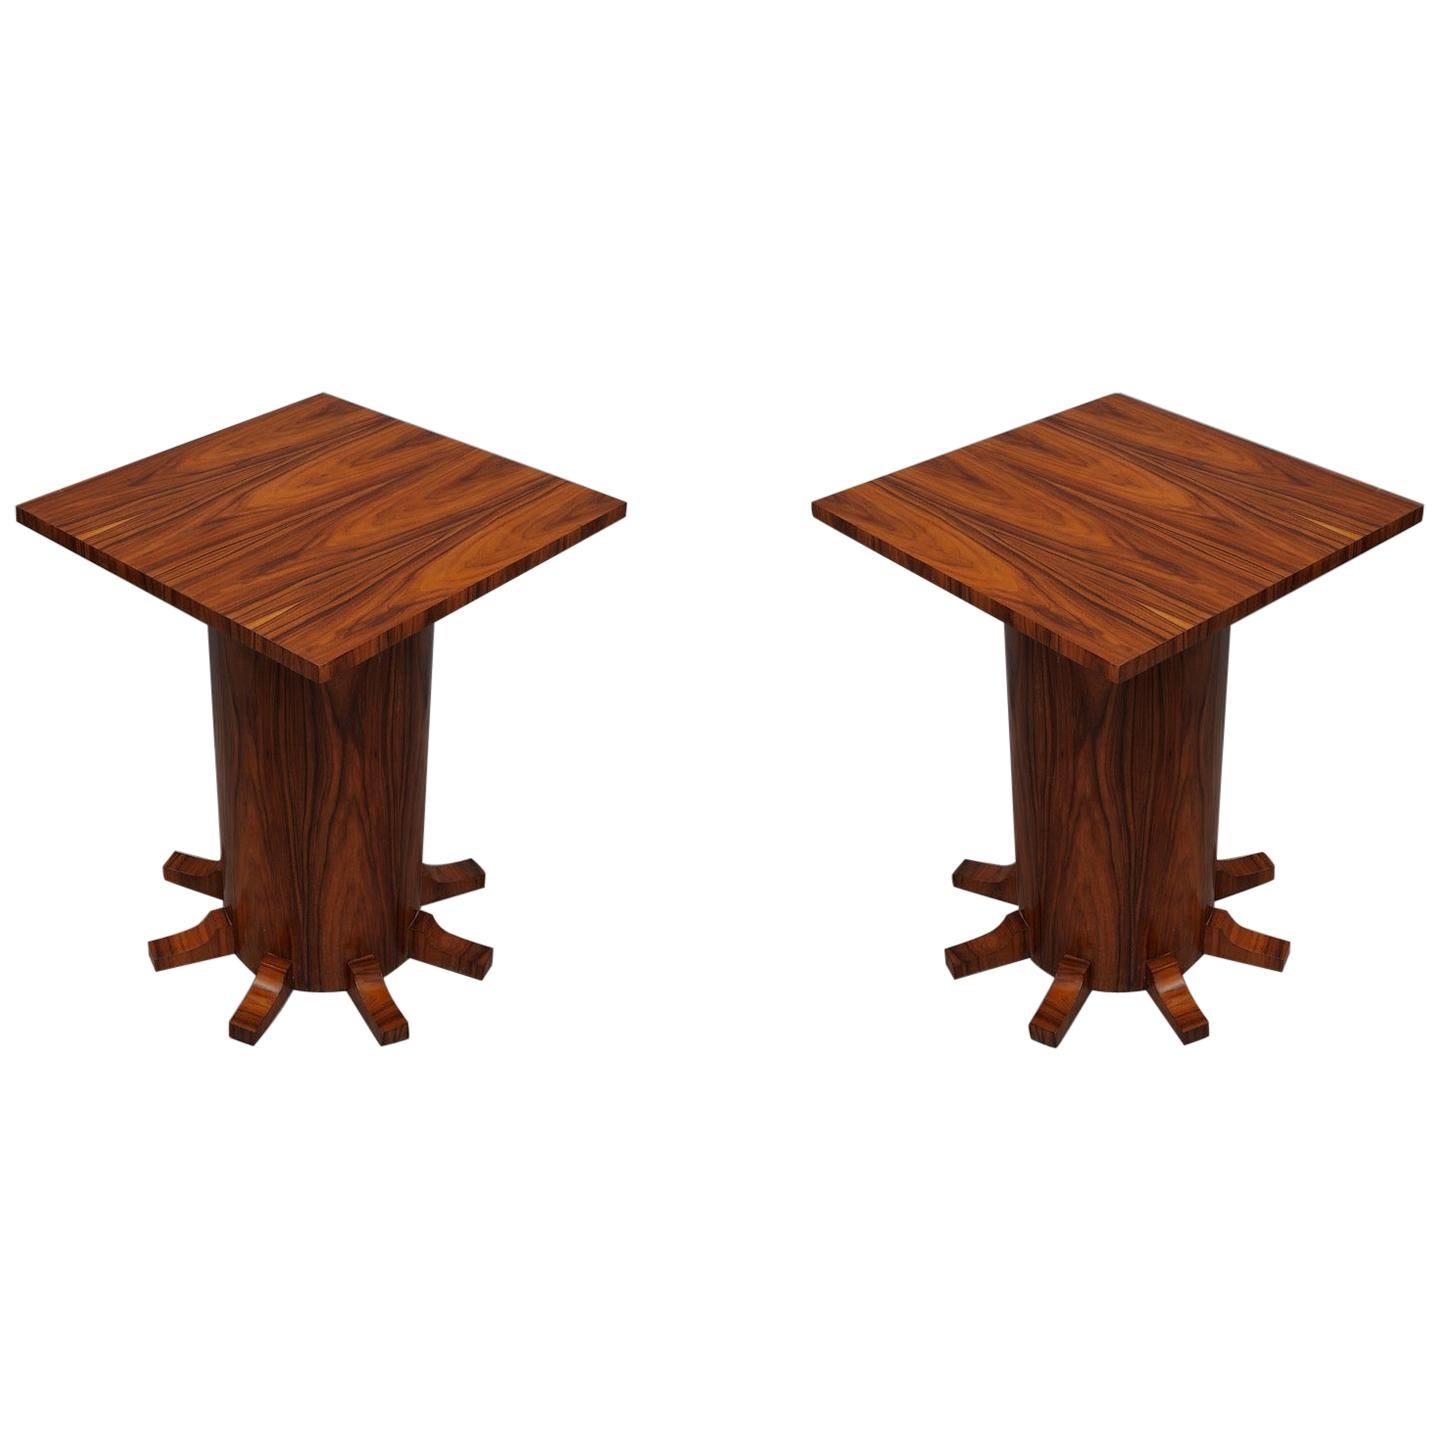 Pair of Art Deco Square Walnut Wood Side Tables, 1920